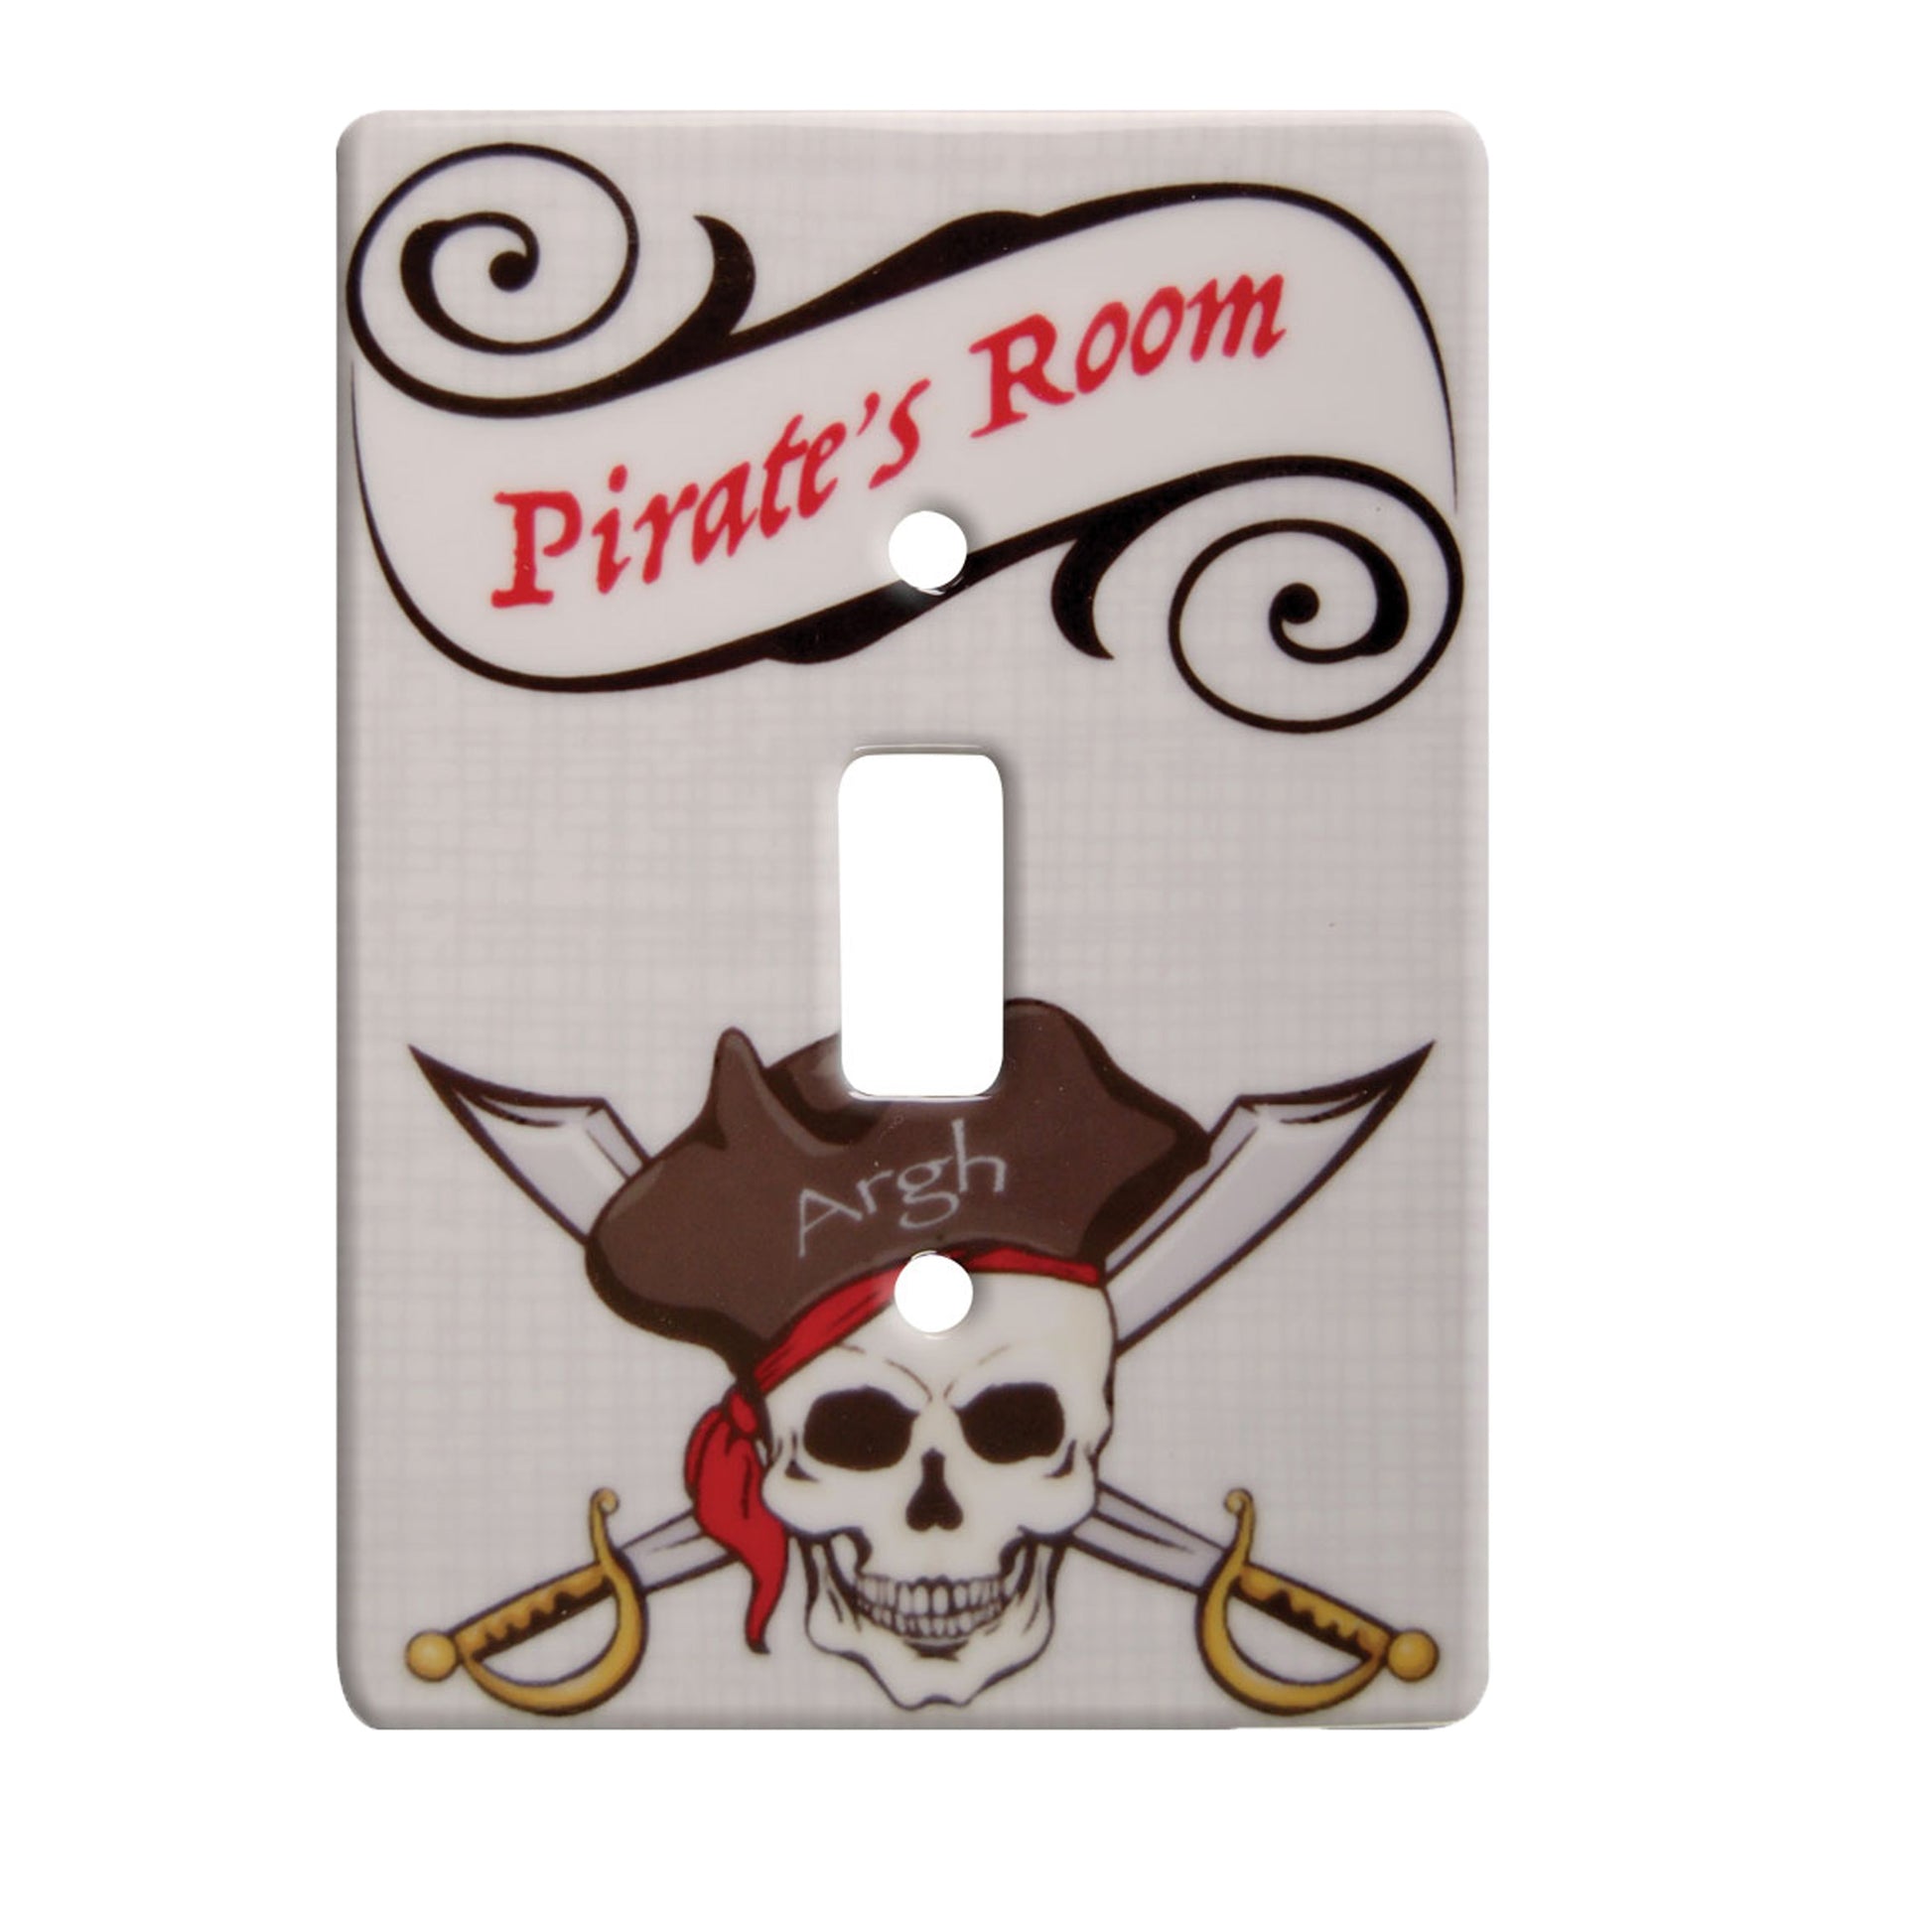 ceramic single toggle switch plate featuring a skull wearing a pirate's hat that reads "argh", and have two swords crossing behind it. also in red font at the top of the plate reads "Pirate's room".